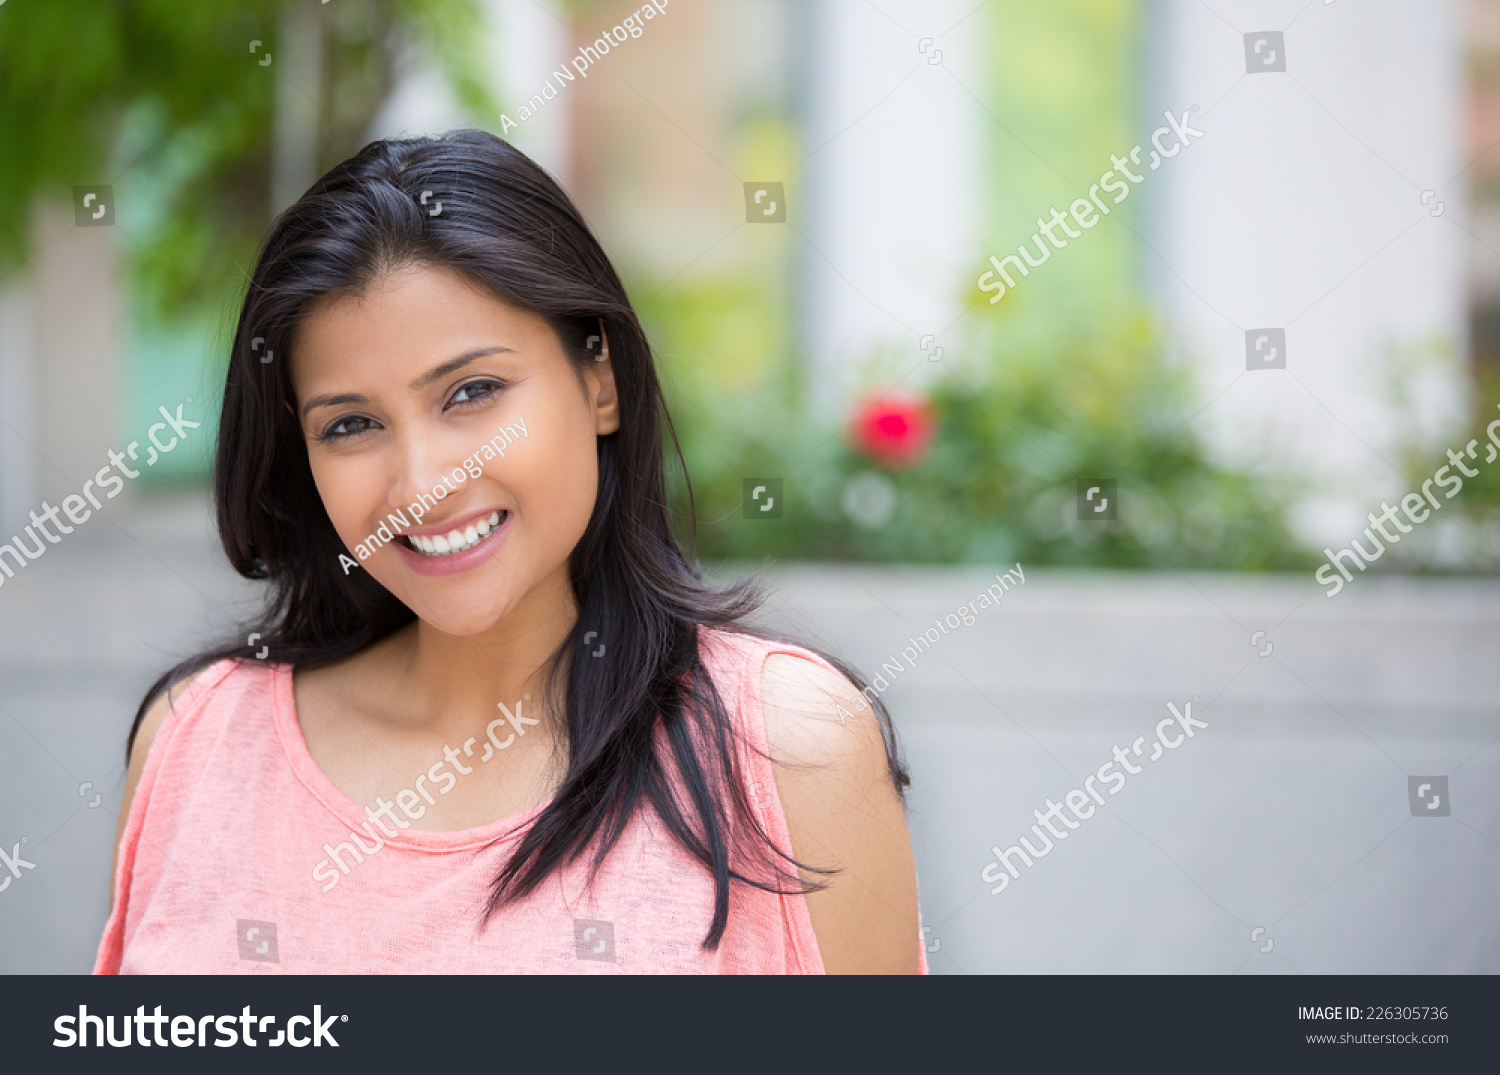 Closeup portrait of confident smiling happy pretty young woman in pink dress, isolated background of blurred trees, flowers. Positive human emotion facial expression feelings, attitude, perception #226305736